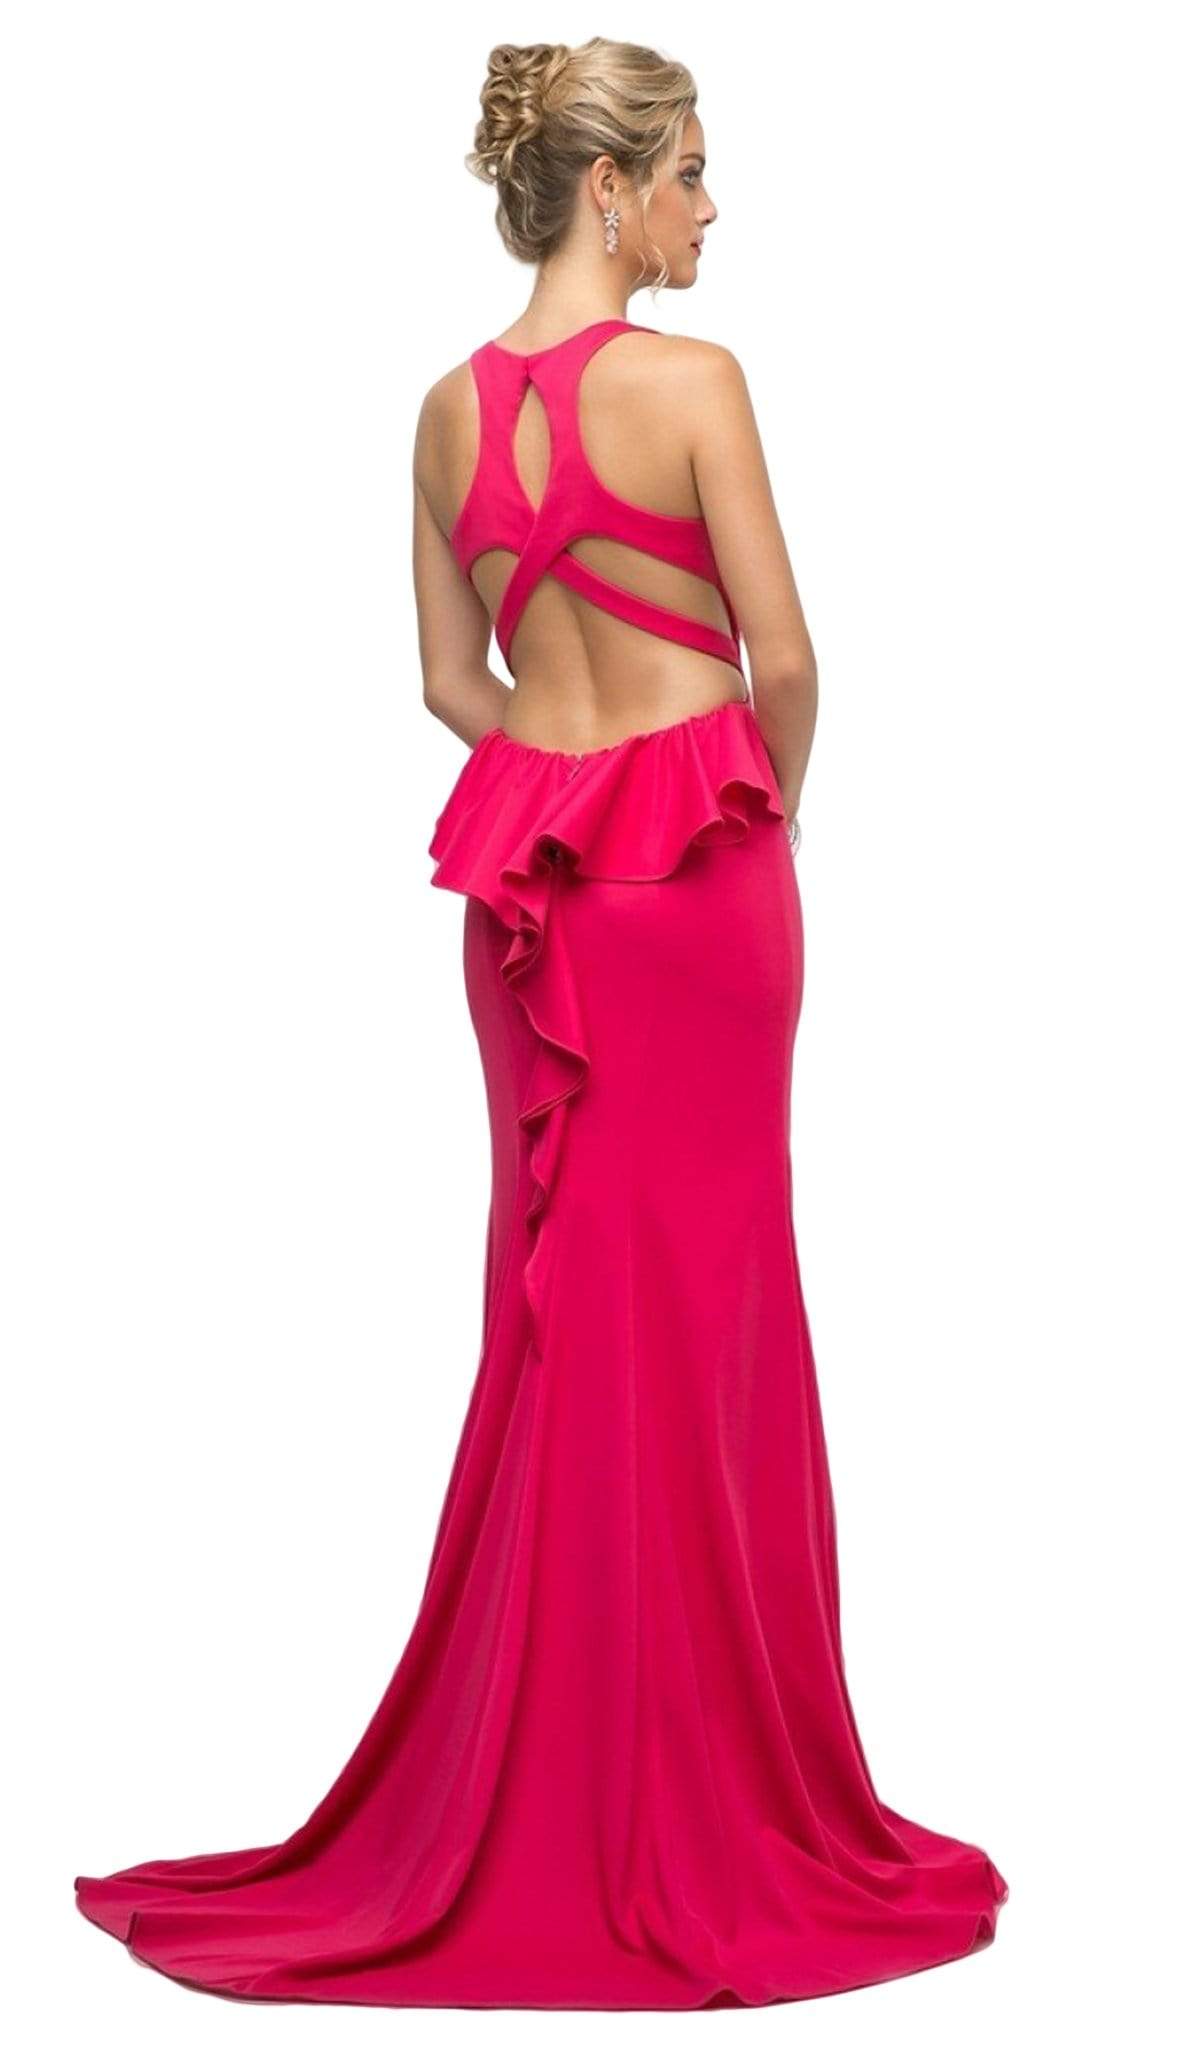 Cinderella Divine - UR137 Plunging Bodice Strappy Knit Trumpet Gown Special Occasion Dress